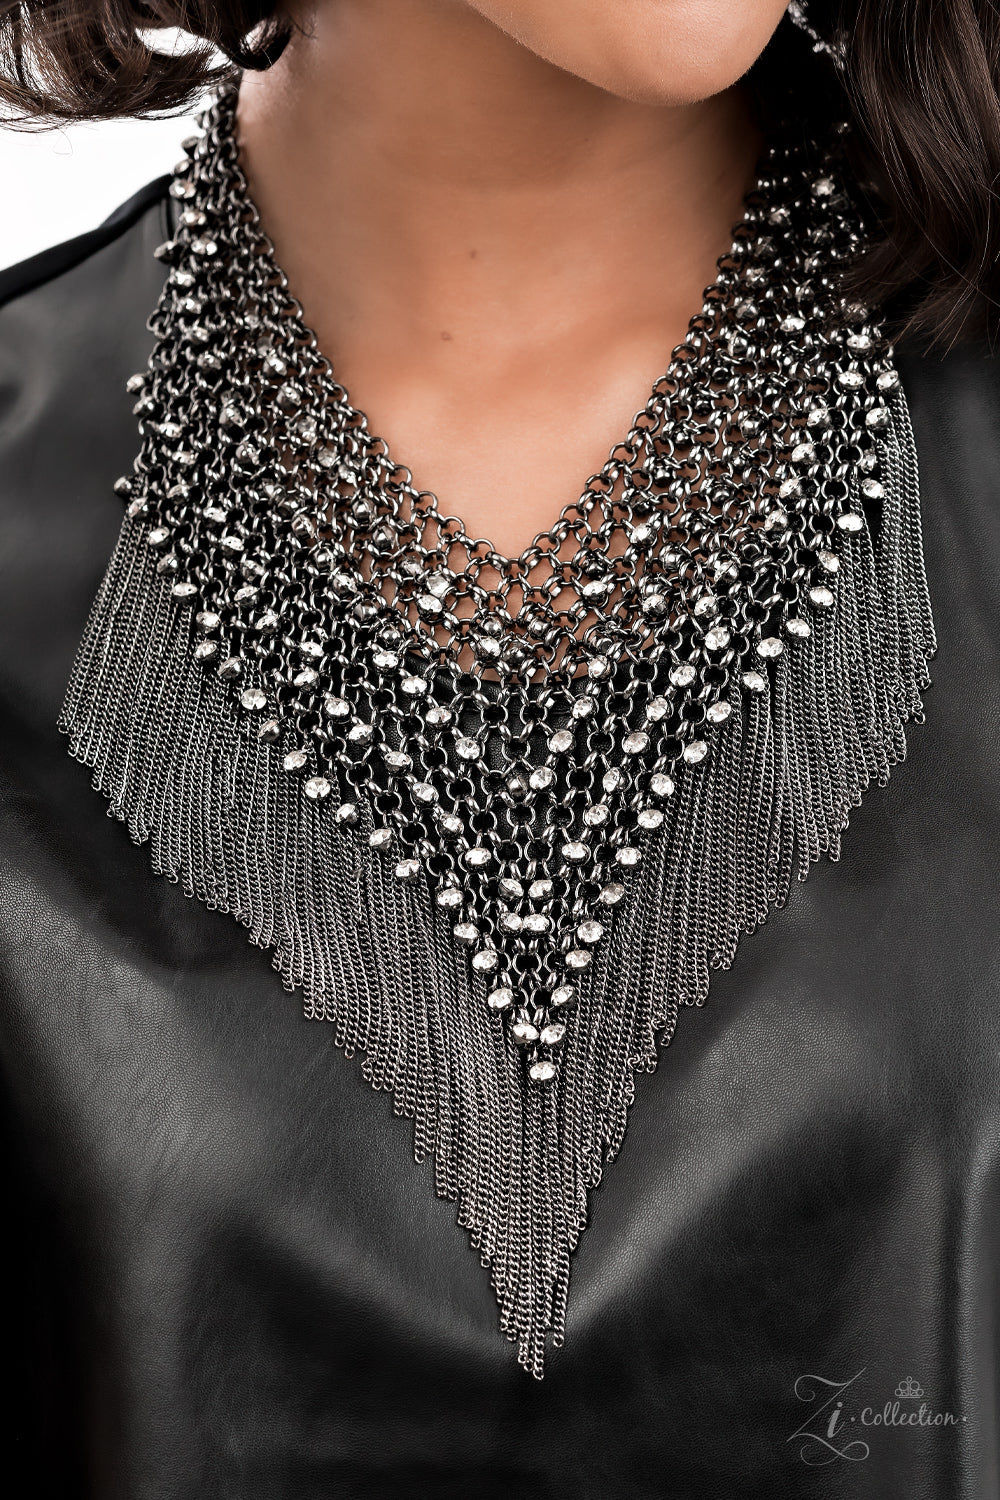 Impulsive 2021 Zi Collection Necklace - Paparazzi Accessories  Row after row of blinding white rhinestones trickle from a seemingly infinite collection of bold gunmetal links that interlock into an intensely tapered metallic net down the chest. Gritty gunmetal chains stream from the bottom of the glamorously grunge statement piece, adding hypnotic movement to the fearless attitude of this main attraction. Features an adjustable clasp closure. Includes one pair of matching earrings.